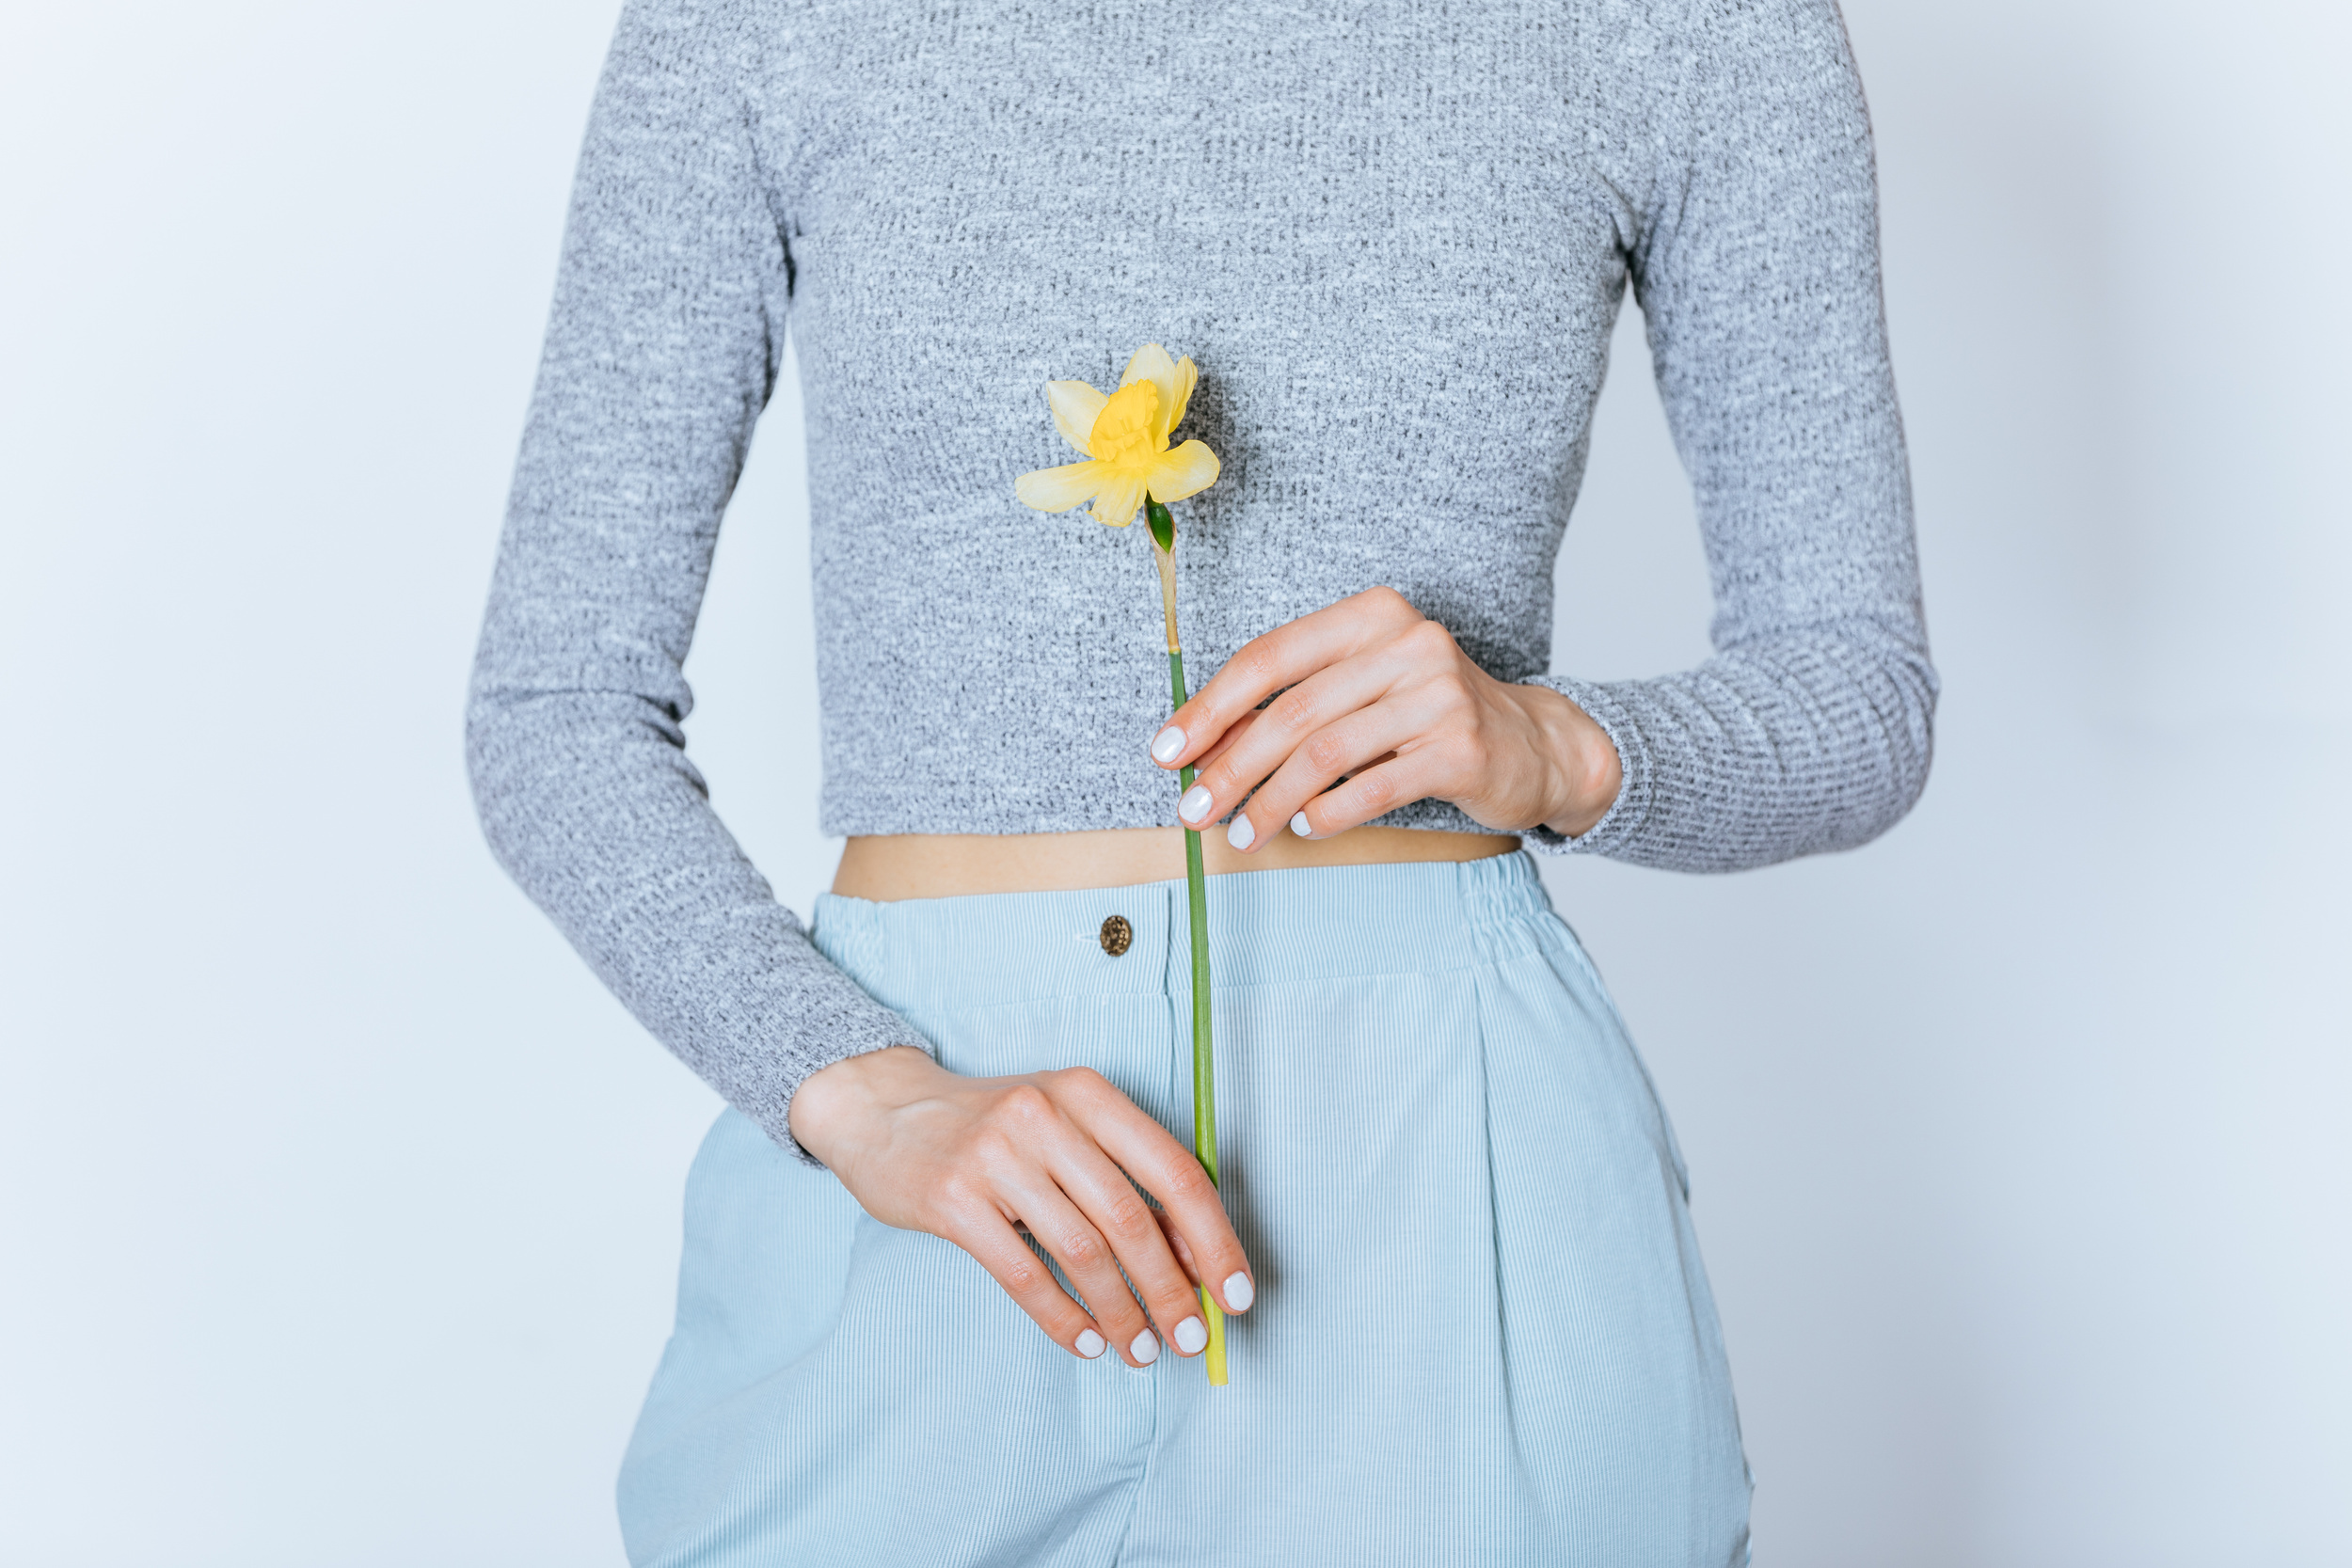 <p>Long-sleeved crop tops have a very, very short season. In the winter, your midriff gets too cold. In the summer, your arms get too hot. In the spring, they’re just right. Now is the time to wear them, so take advantage. </p><p><a href='https://www.msn.com/en-us/community/channel/vid-cj9pqbr0vn9in2b6ddcd8sfgpfq6x6utp44fssrv6mc2gtybw0us'>Follow us on MSN to see more of our exclusive lifestyle content.</a></p>